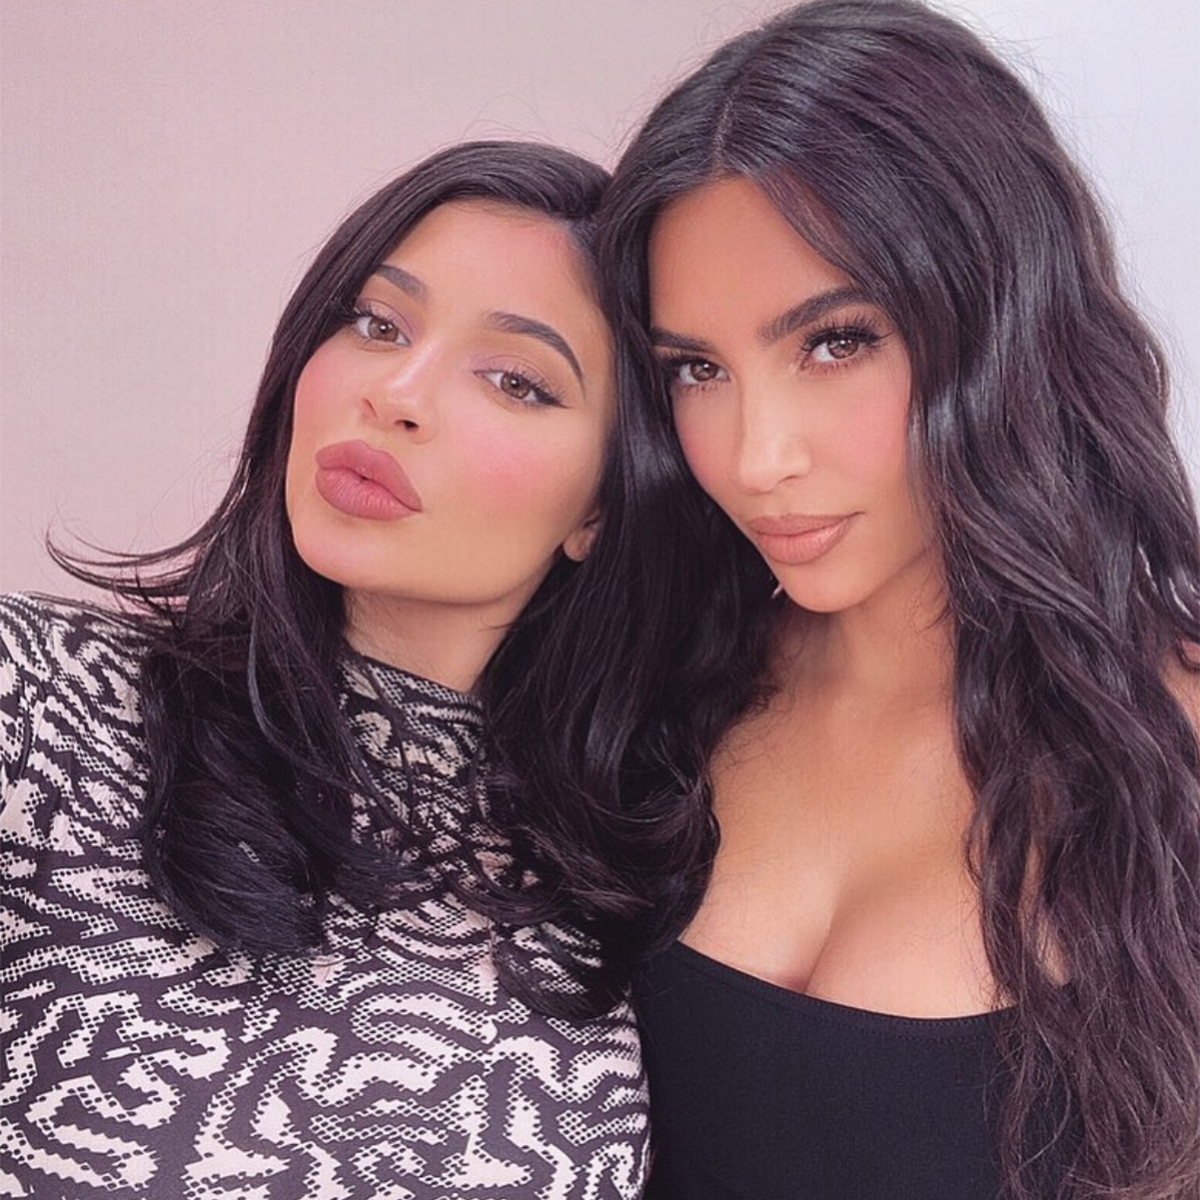 See What Kim Kardashian & Kylie Jenner Look Like With Aging Technology